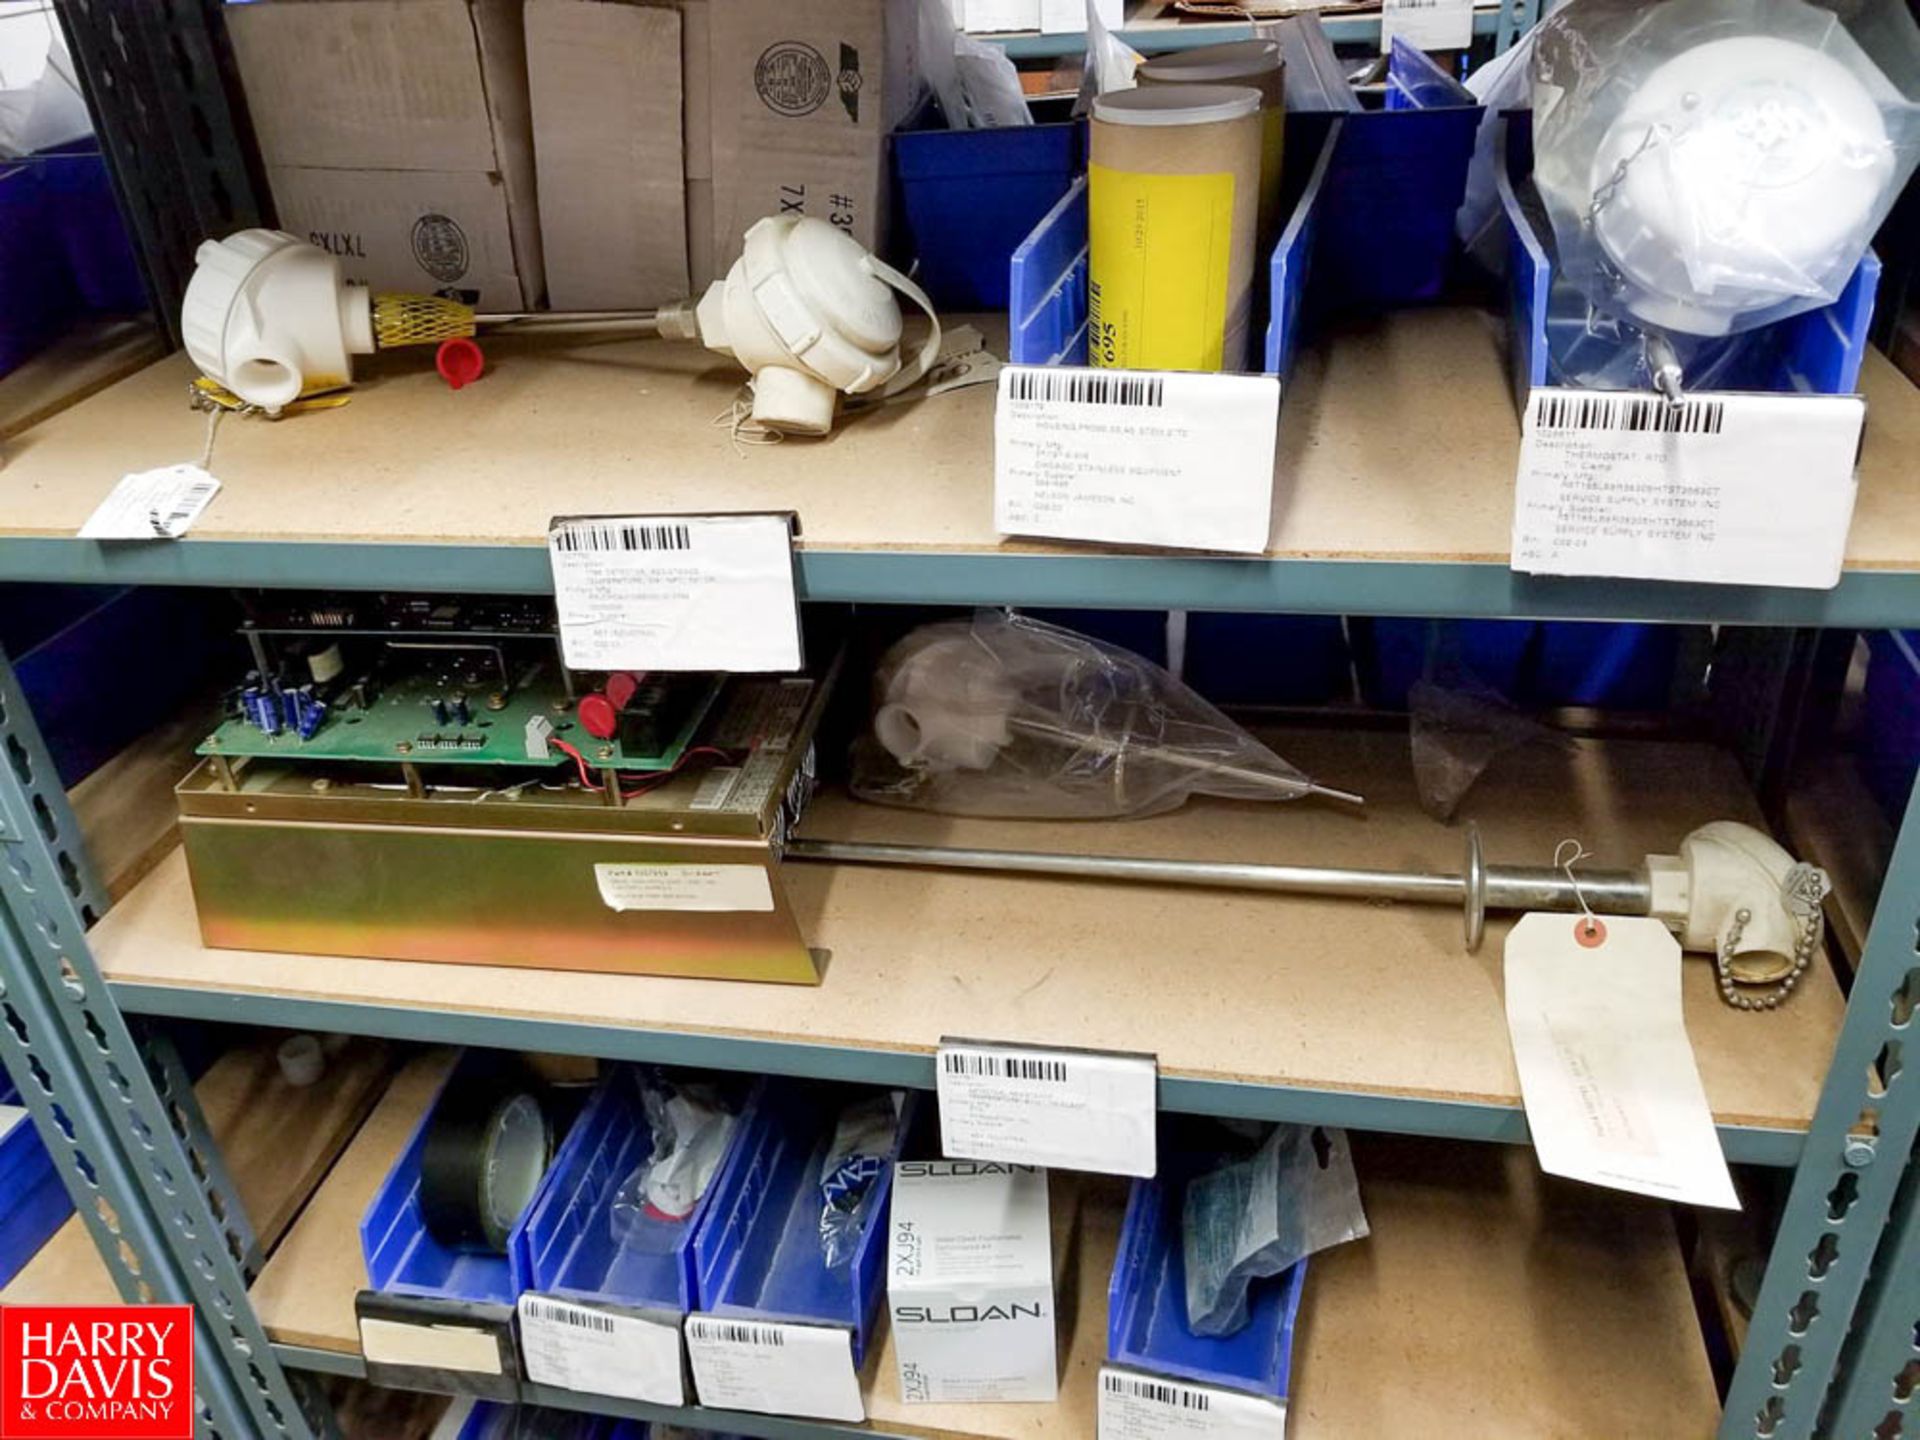 Sections of Adjustable Shelving Including Assorted Valve Kits Graco Parts Stem Valves Valve Balls - Image 15 of 19